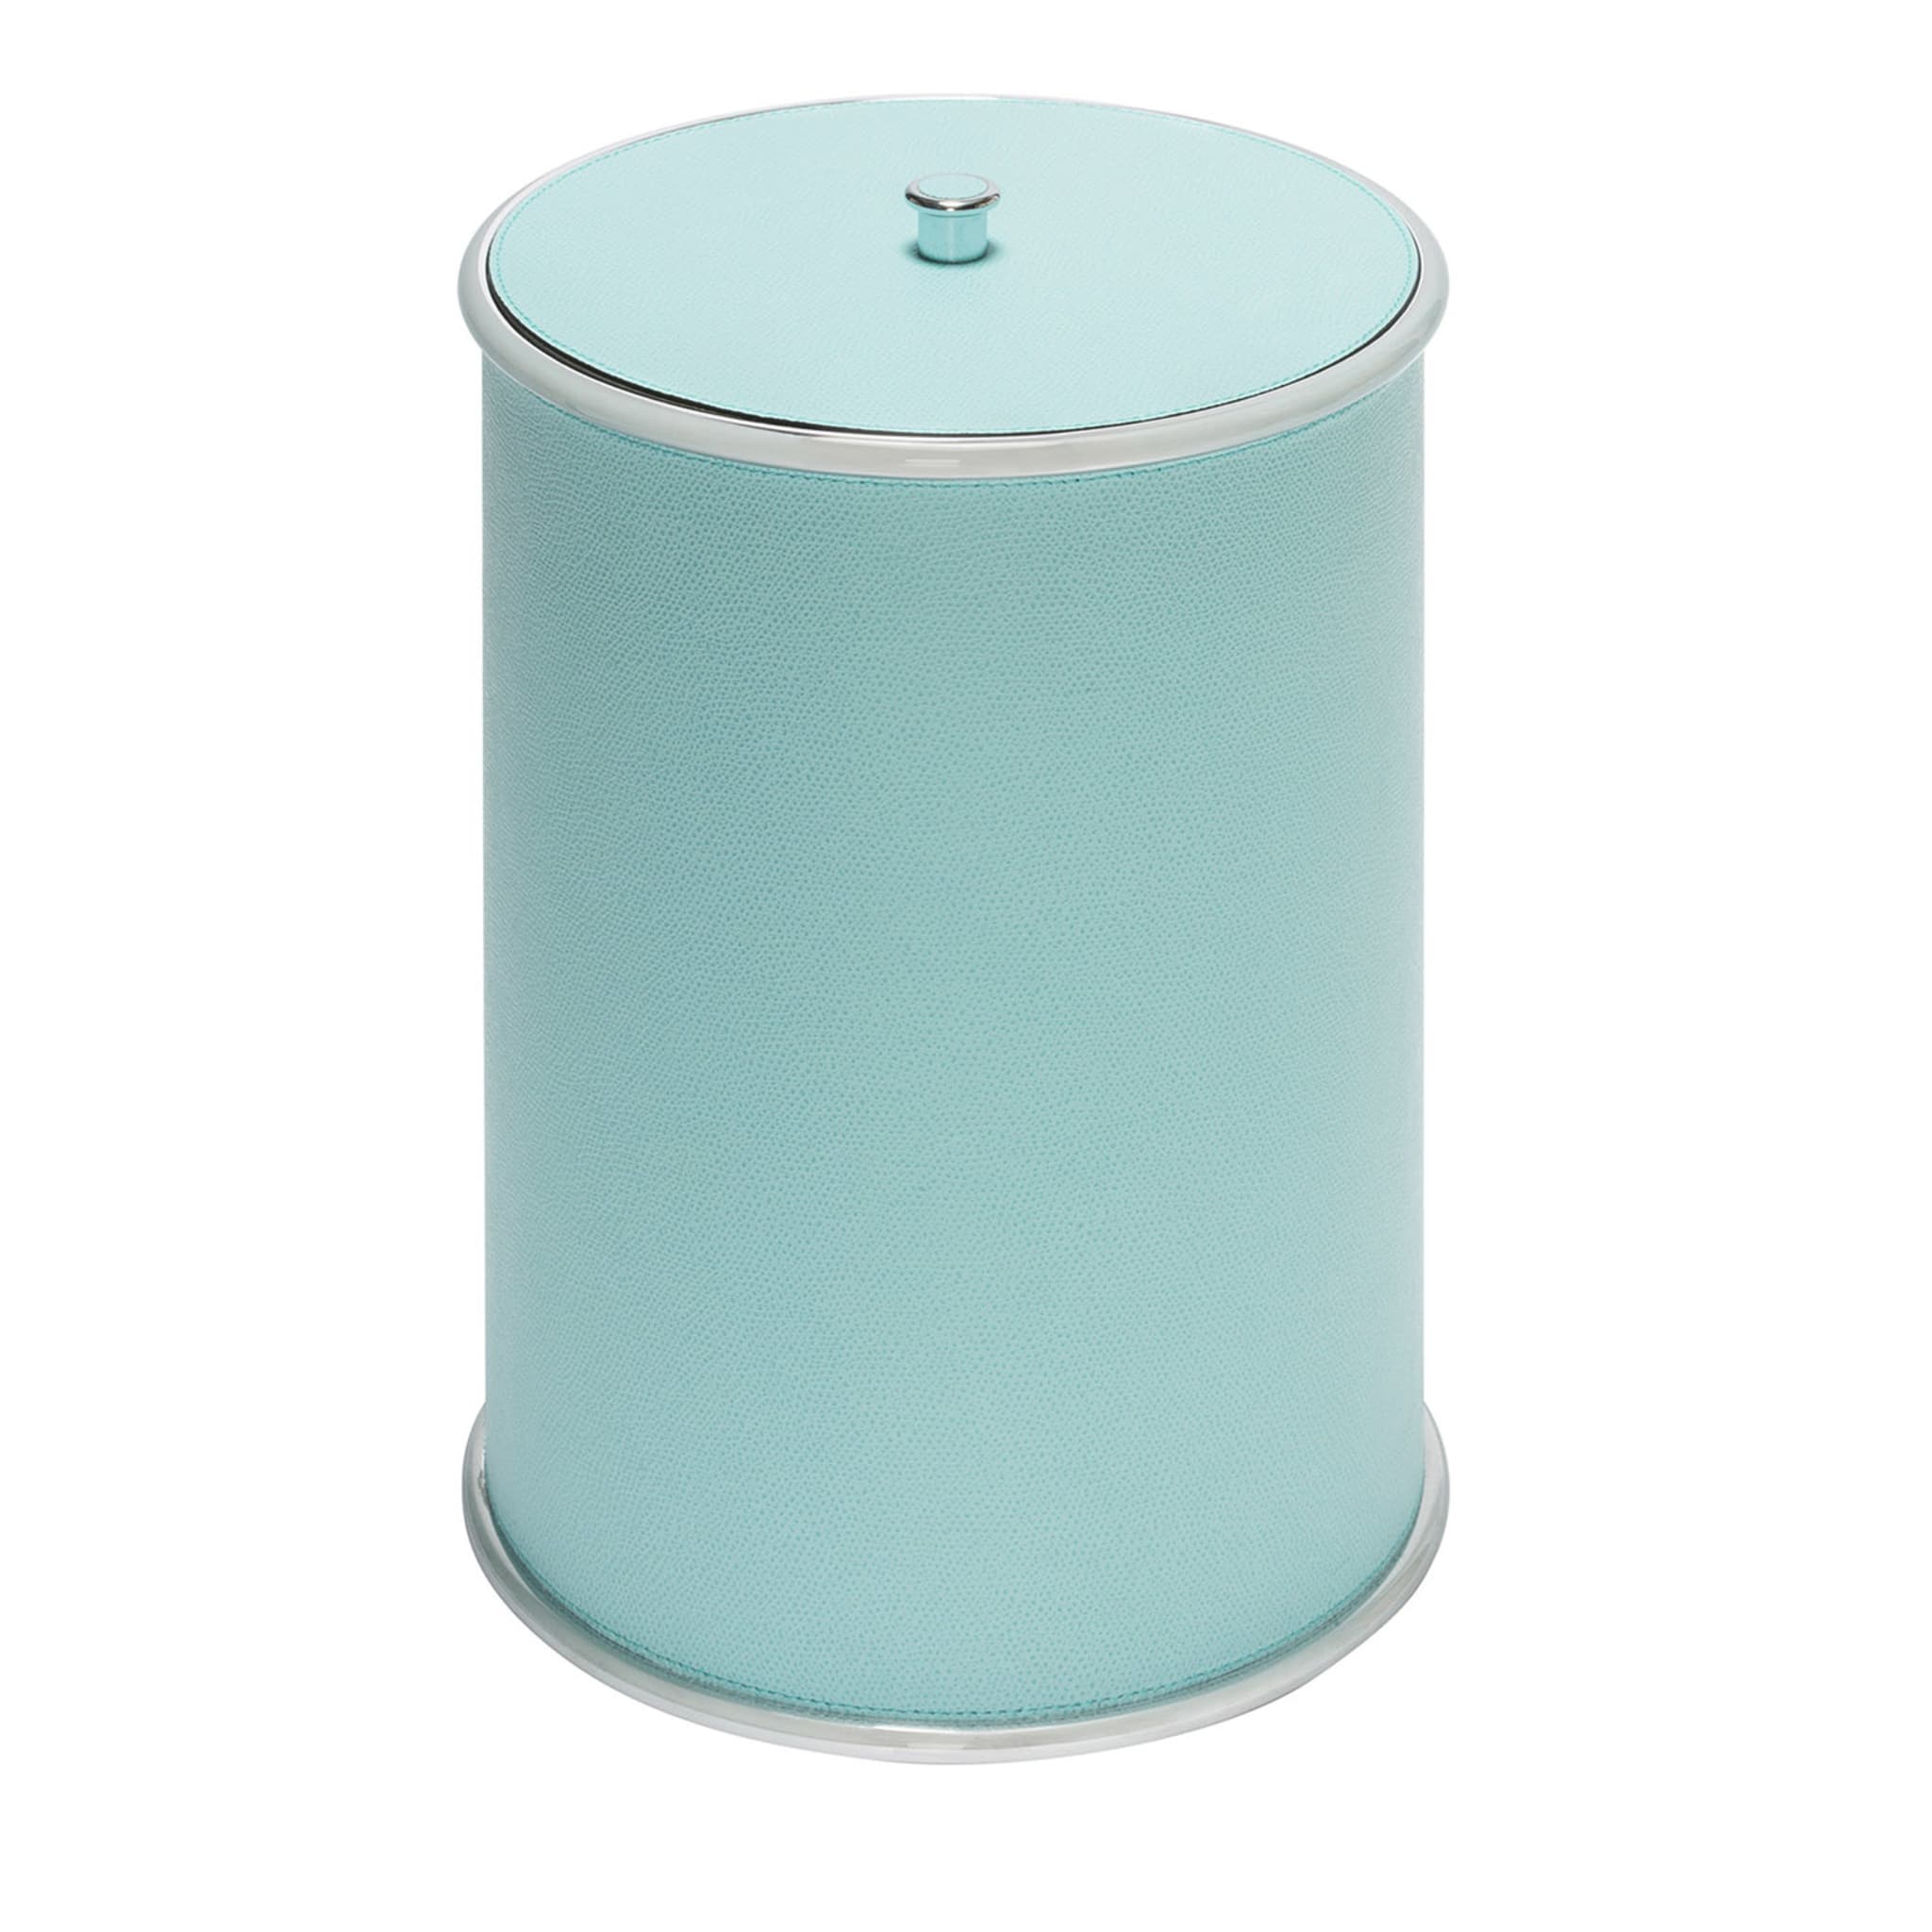 Ravello Light Blue Bin with Lid - Main view